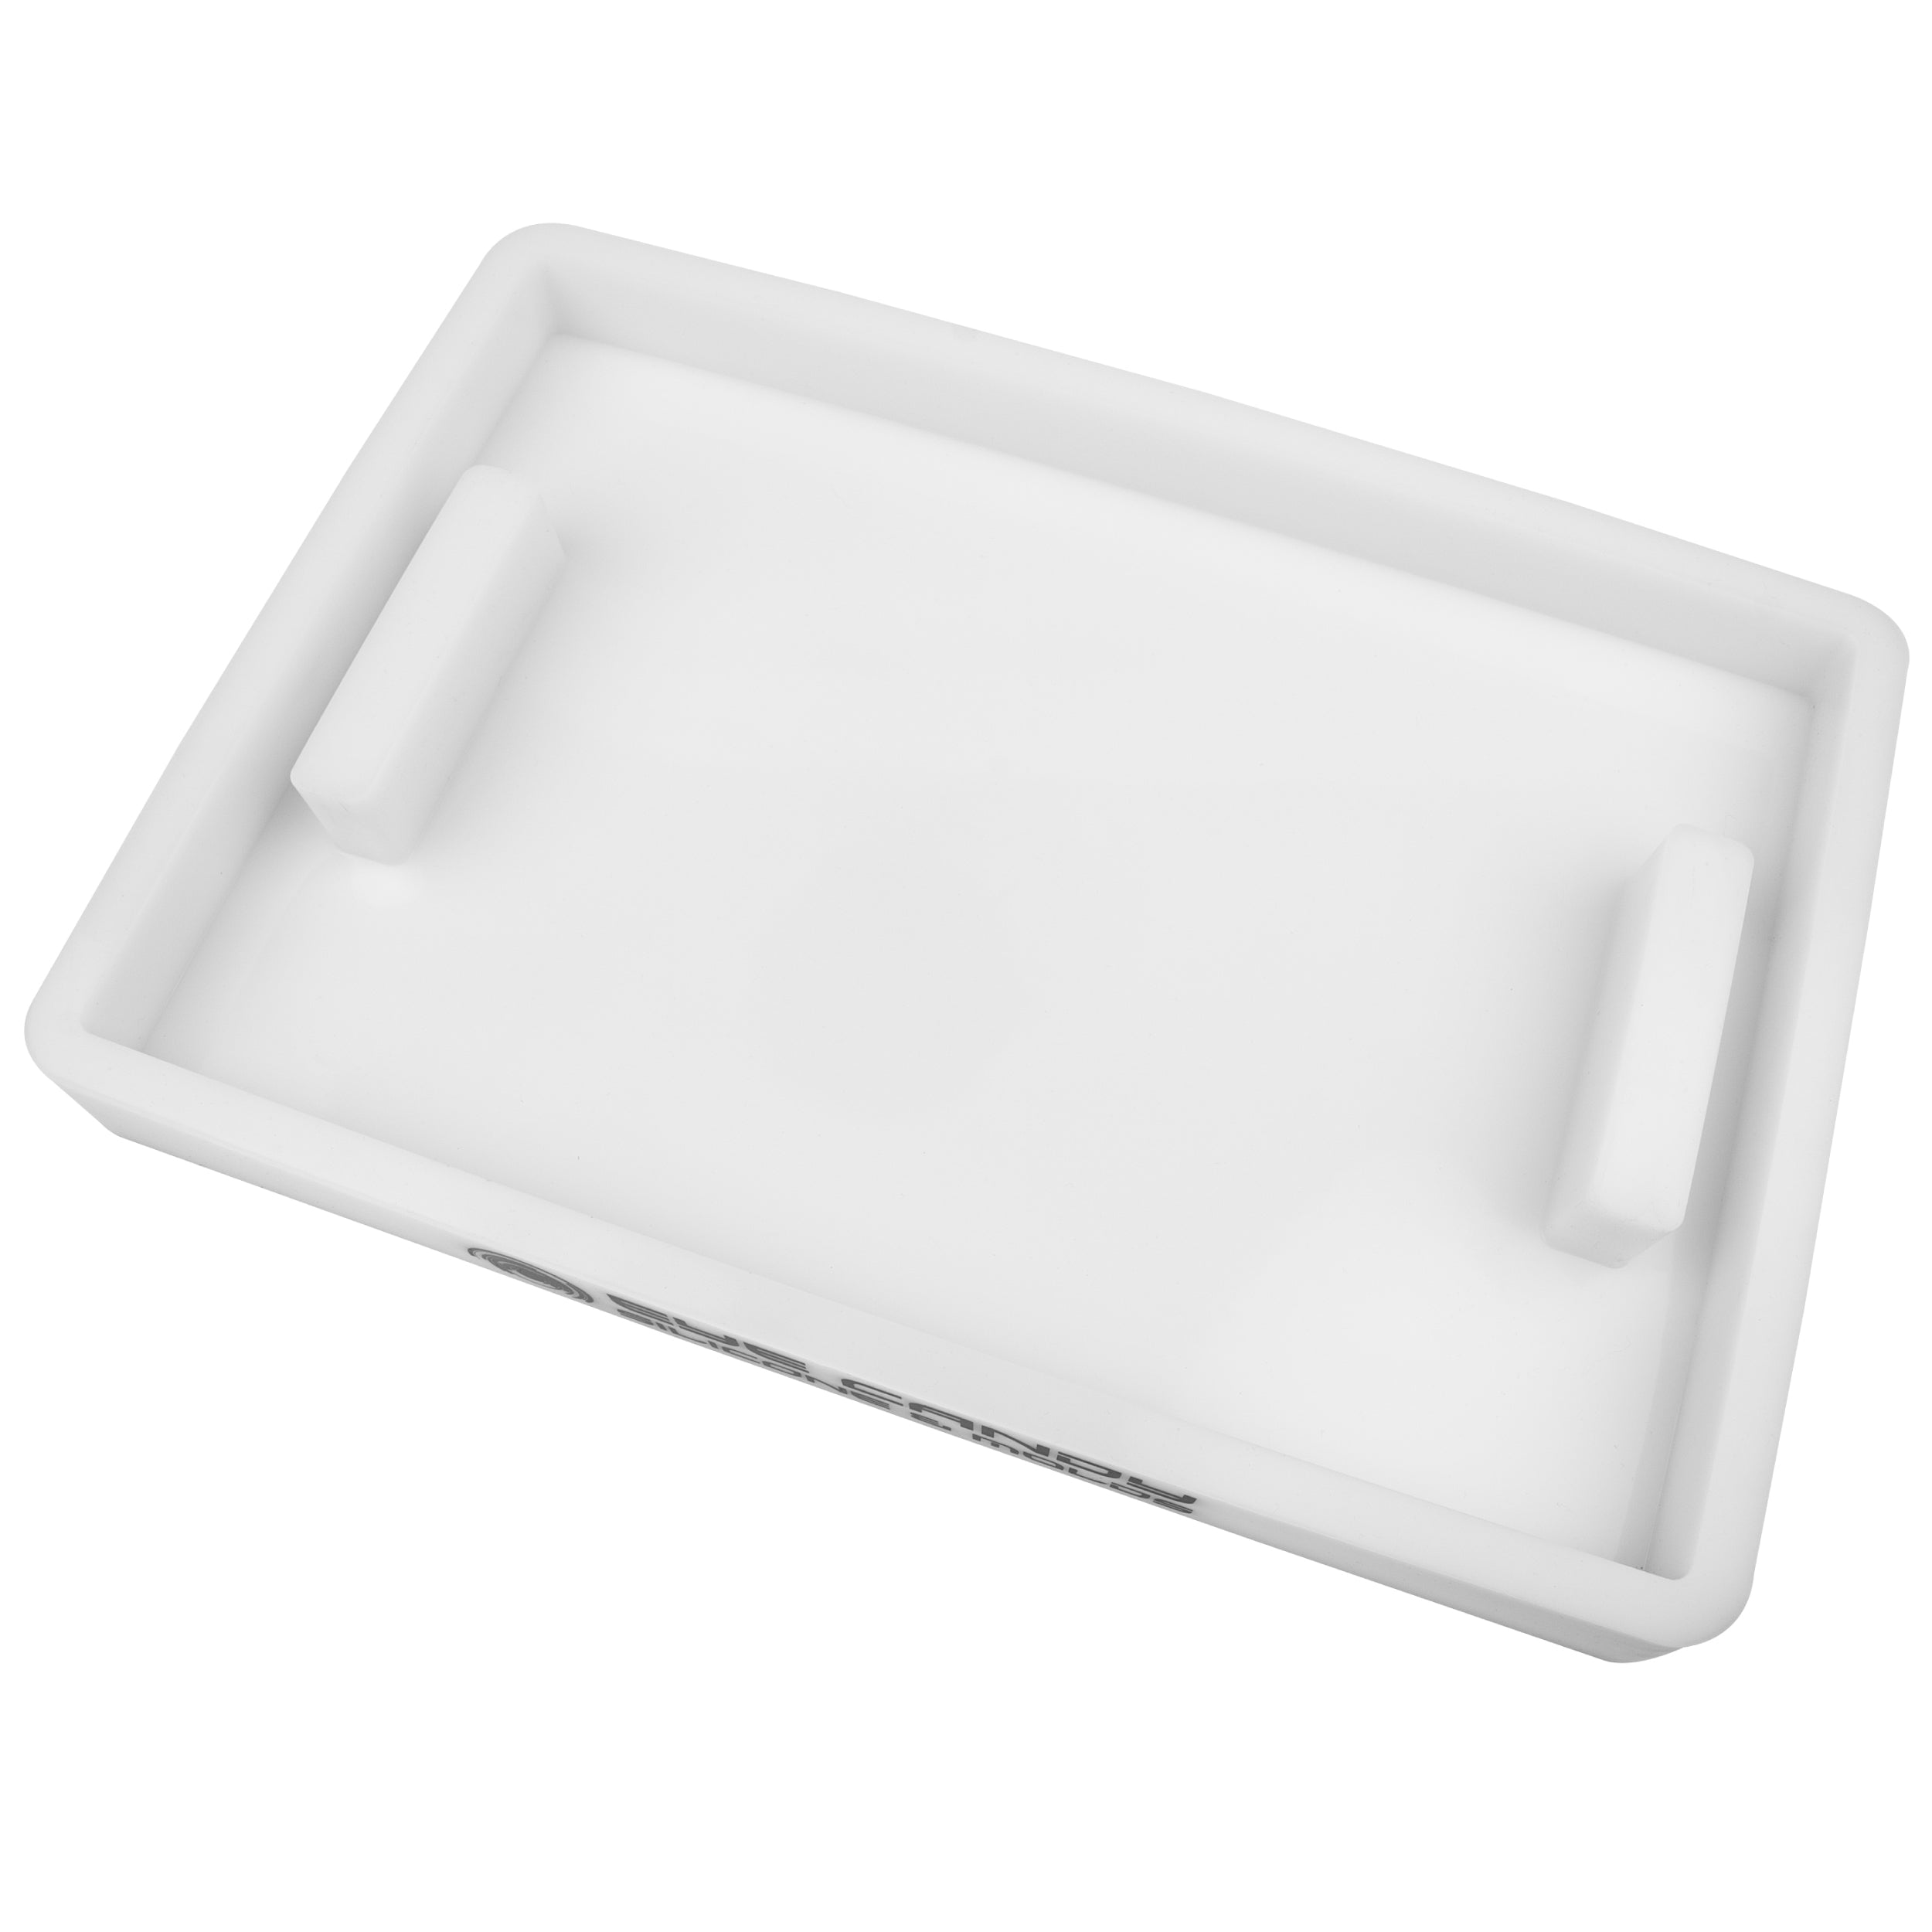 18x12x1 Large Rectangle Silicone Resin Mold